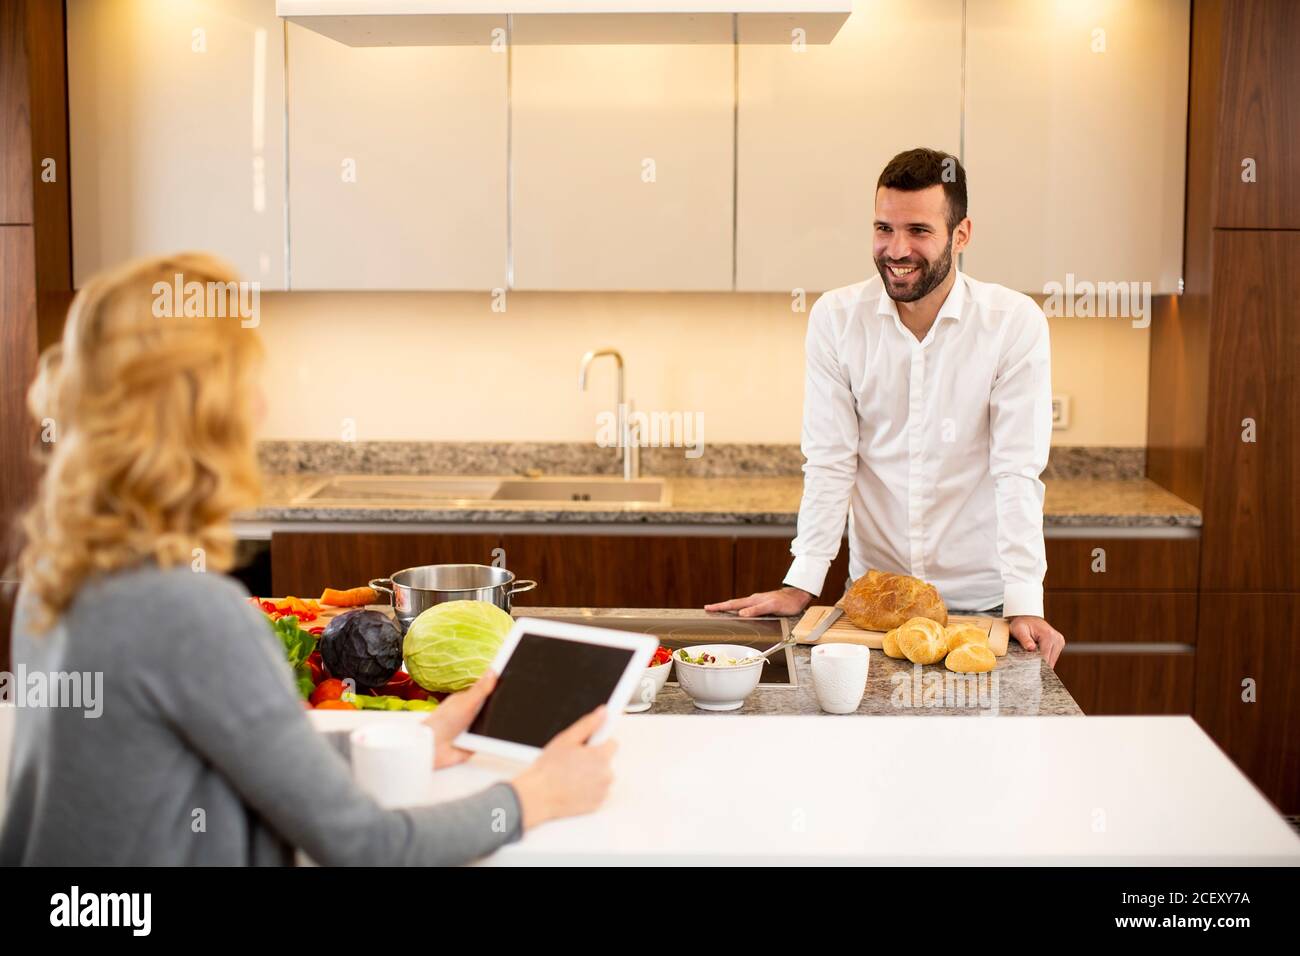 Young woman using tablet at the kitchen table while man preparing food Stock Photo